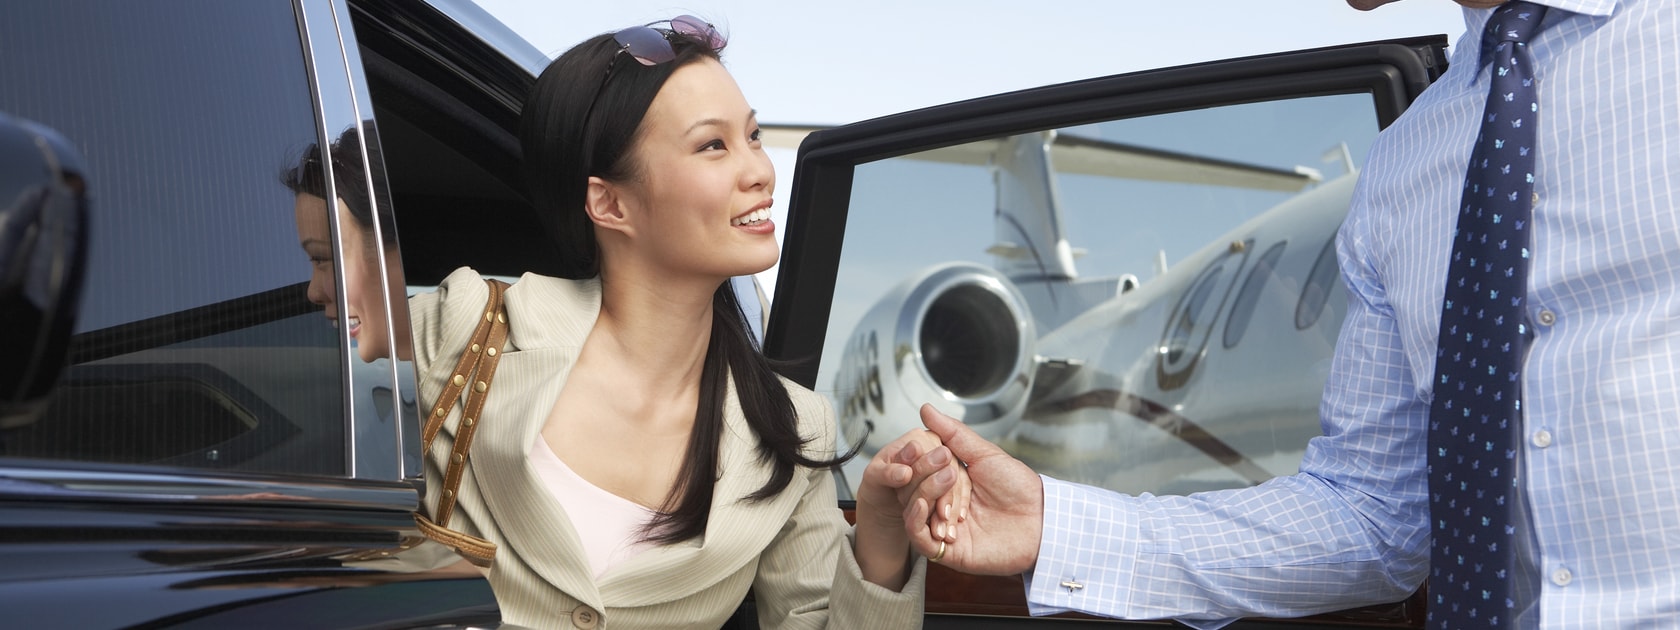 A man in a suit helps a well-dressed woman get out of a car with a private jet in the background.